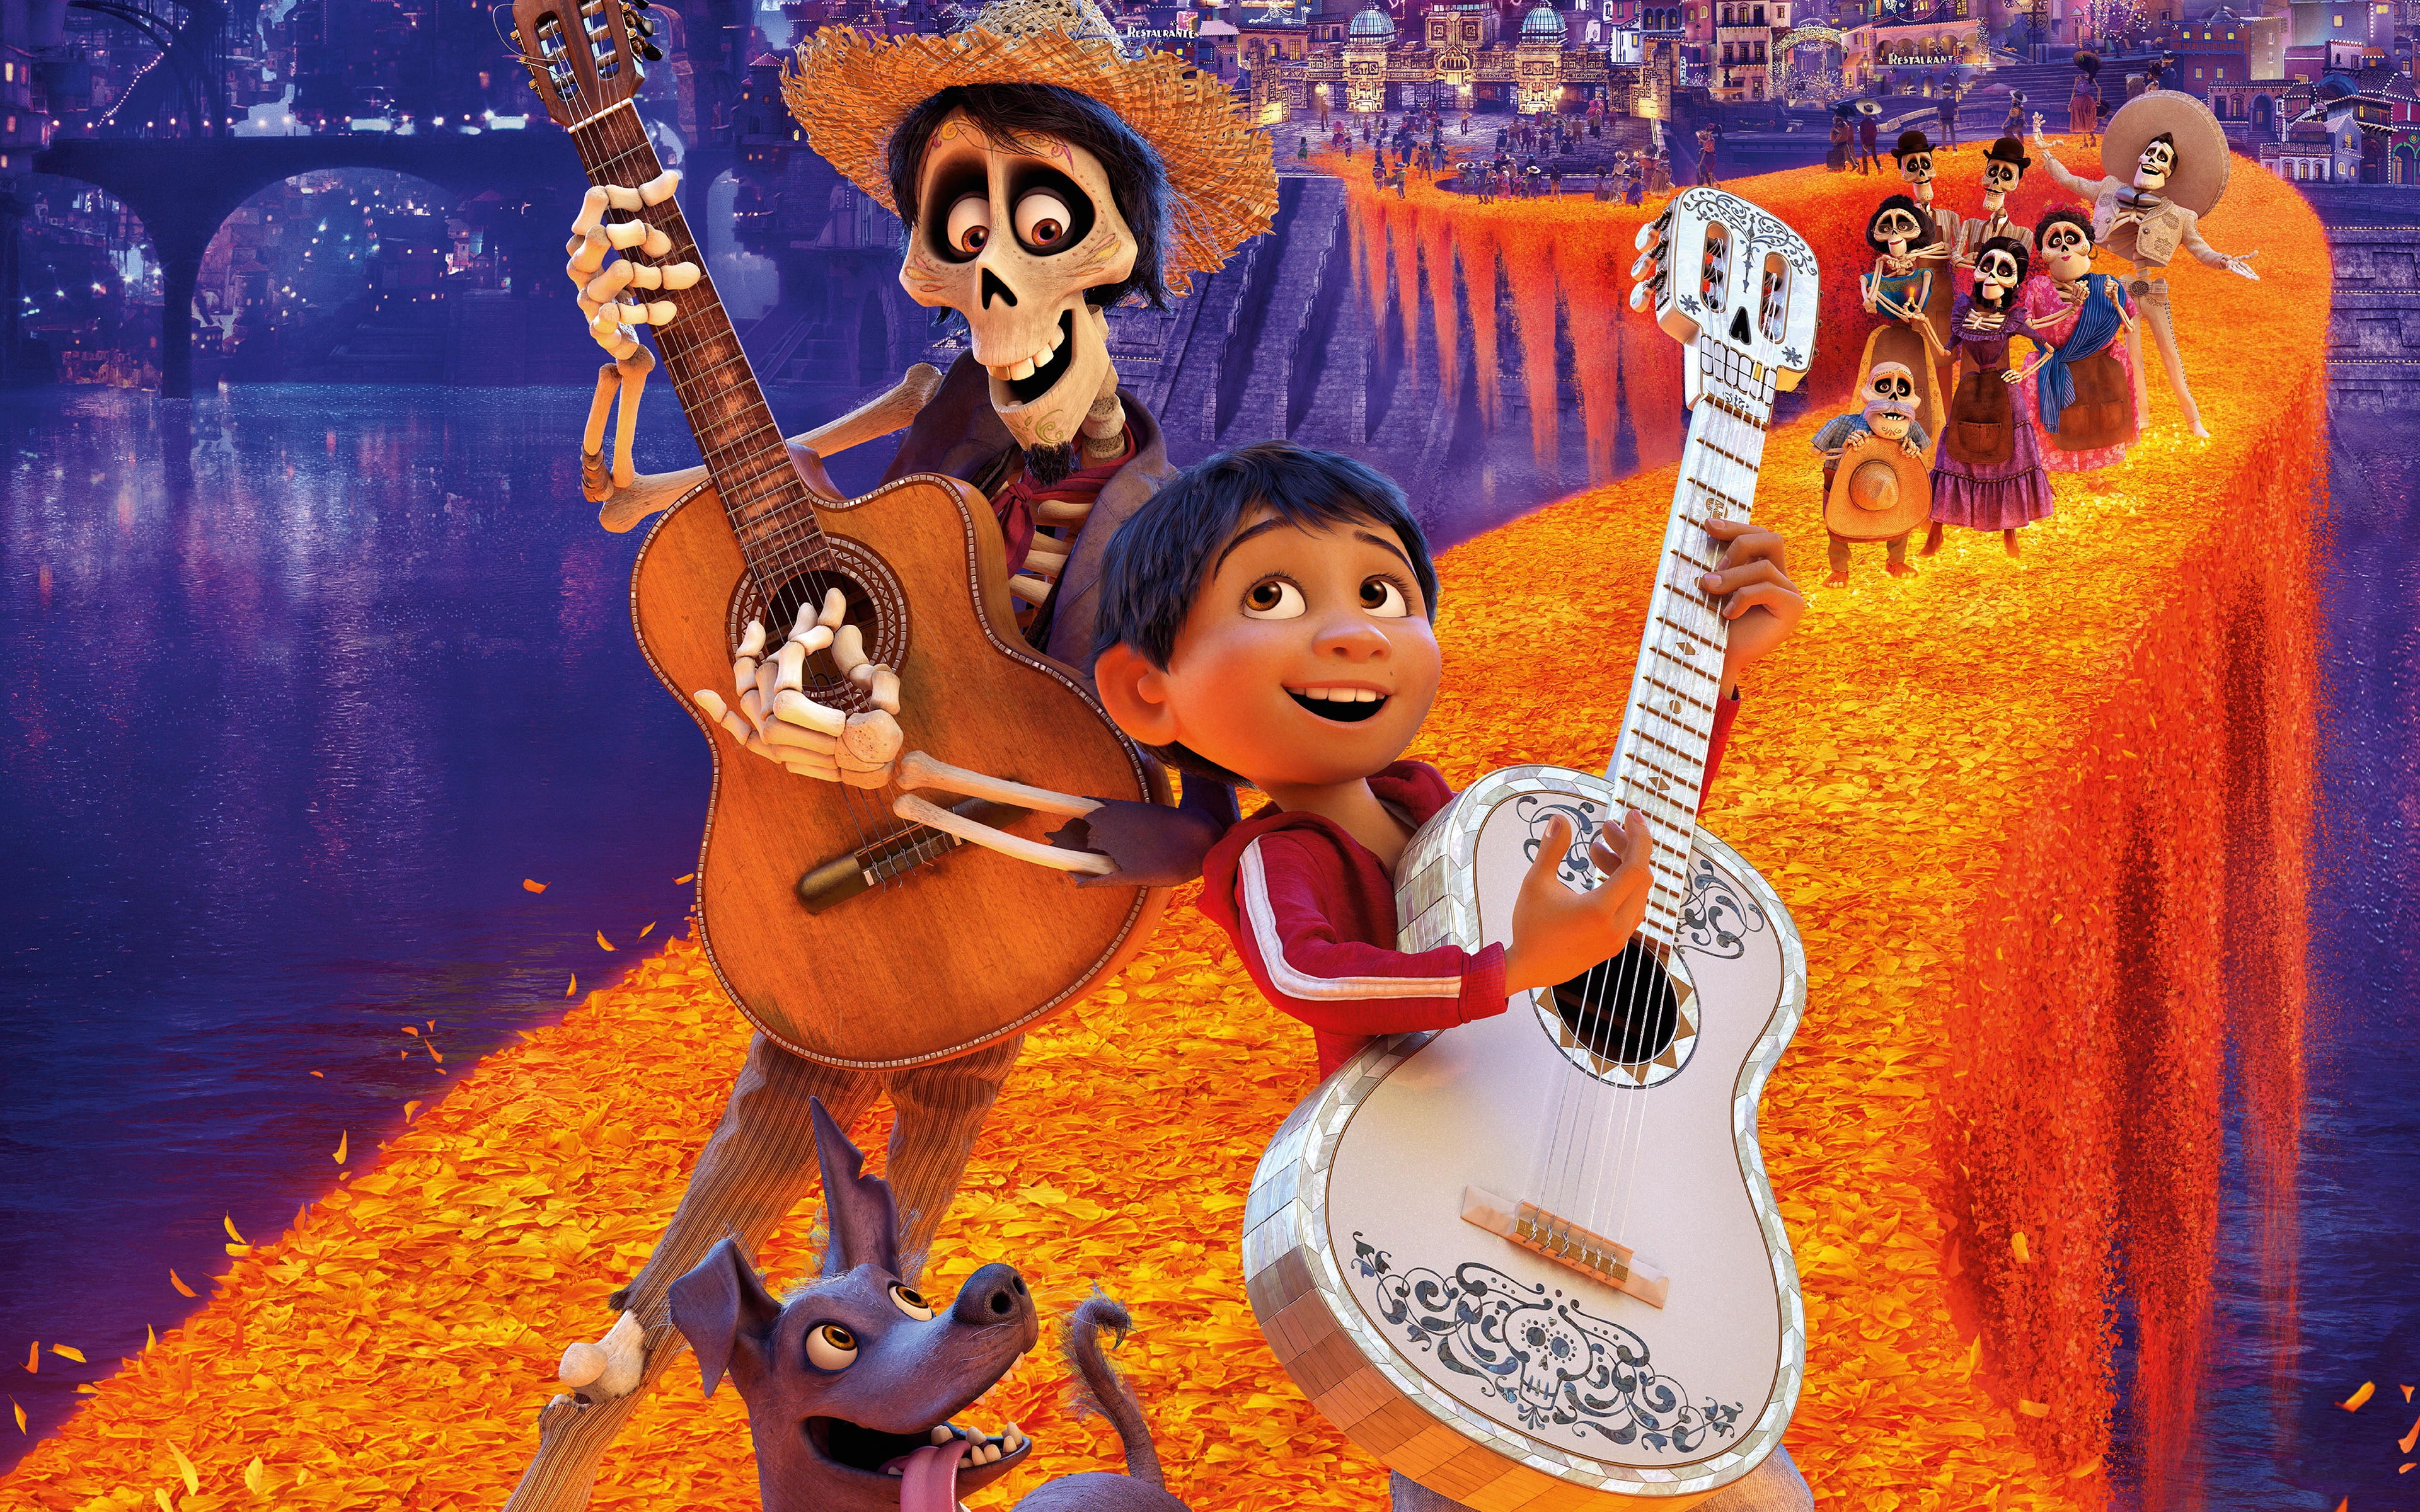 Coco 2017 Disney 3D 4k Movie Poster, adult, portrait, two people